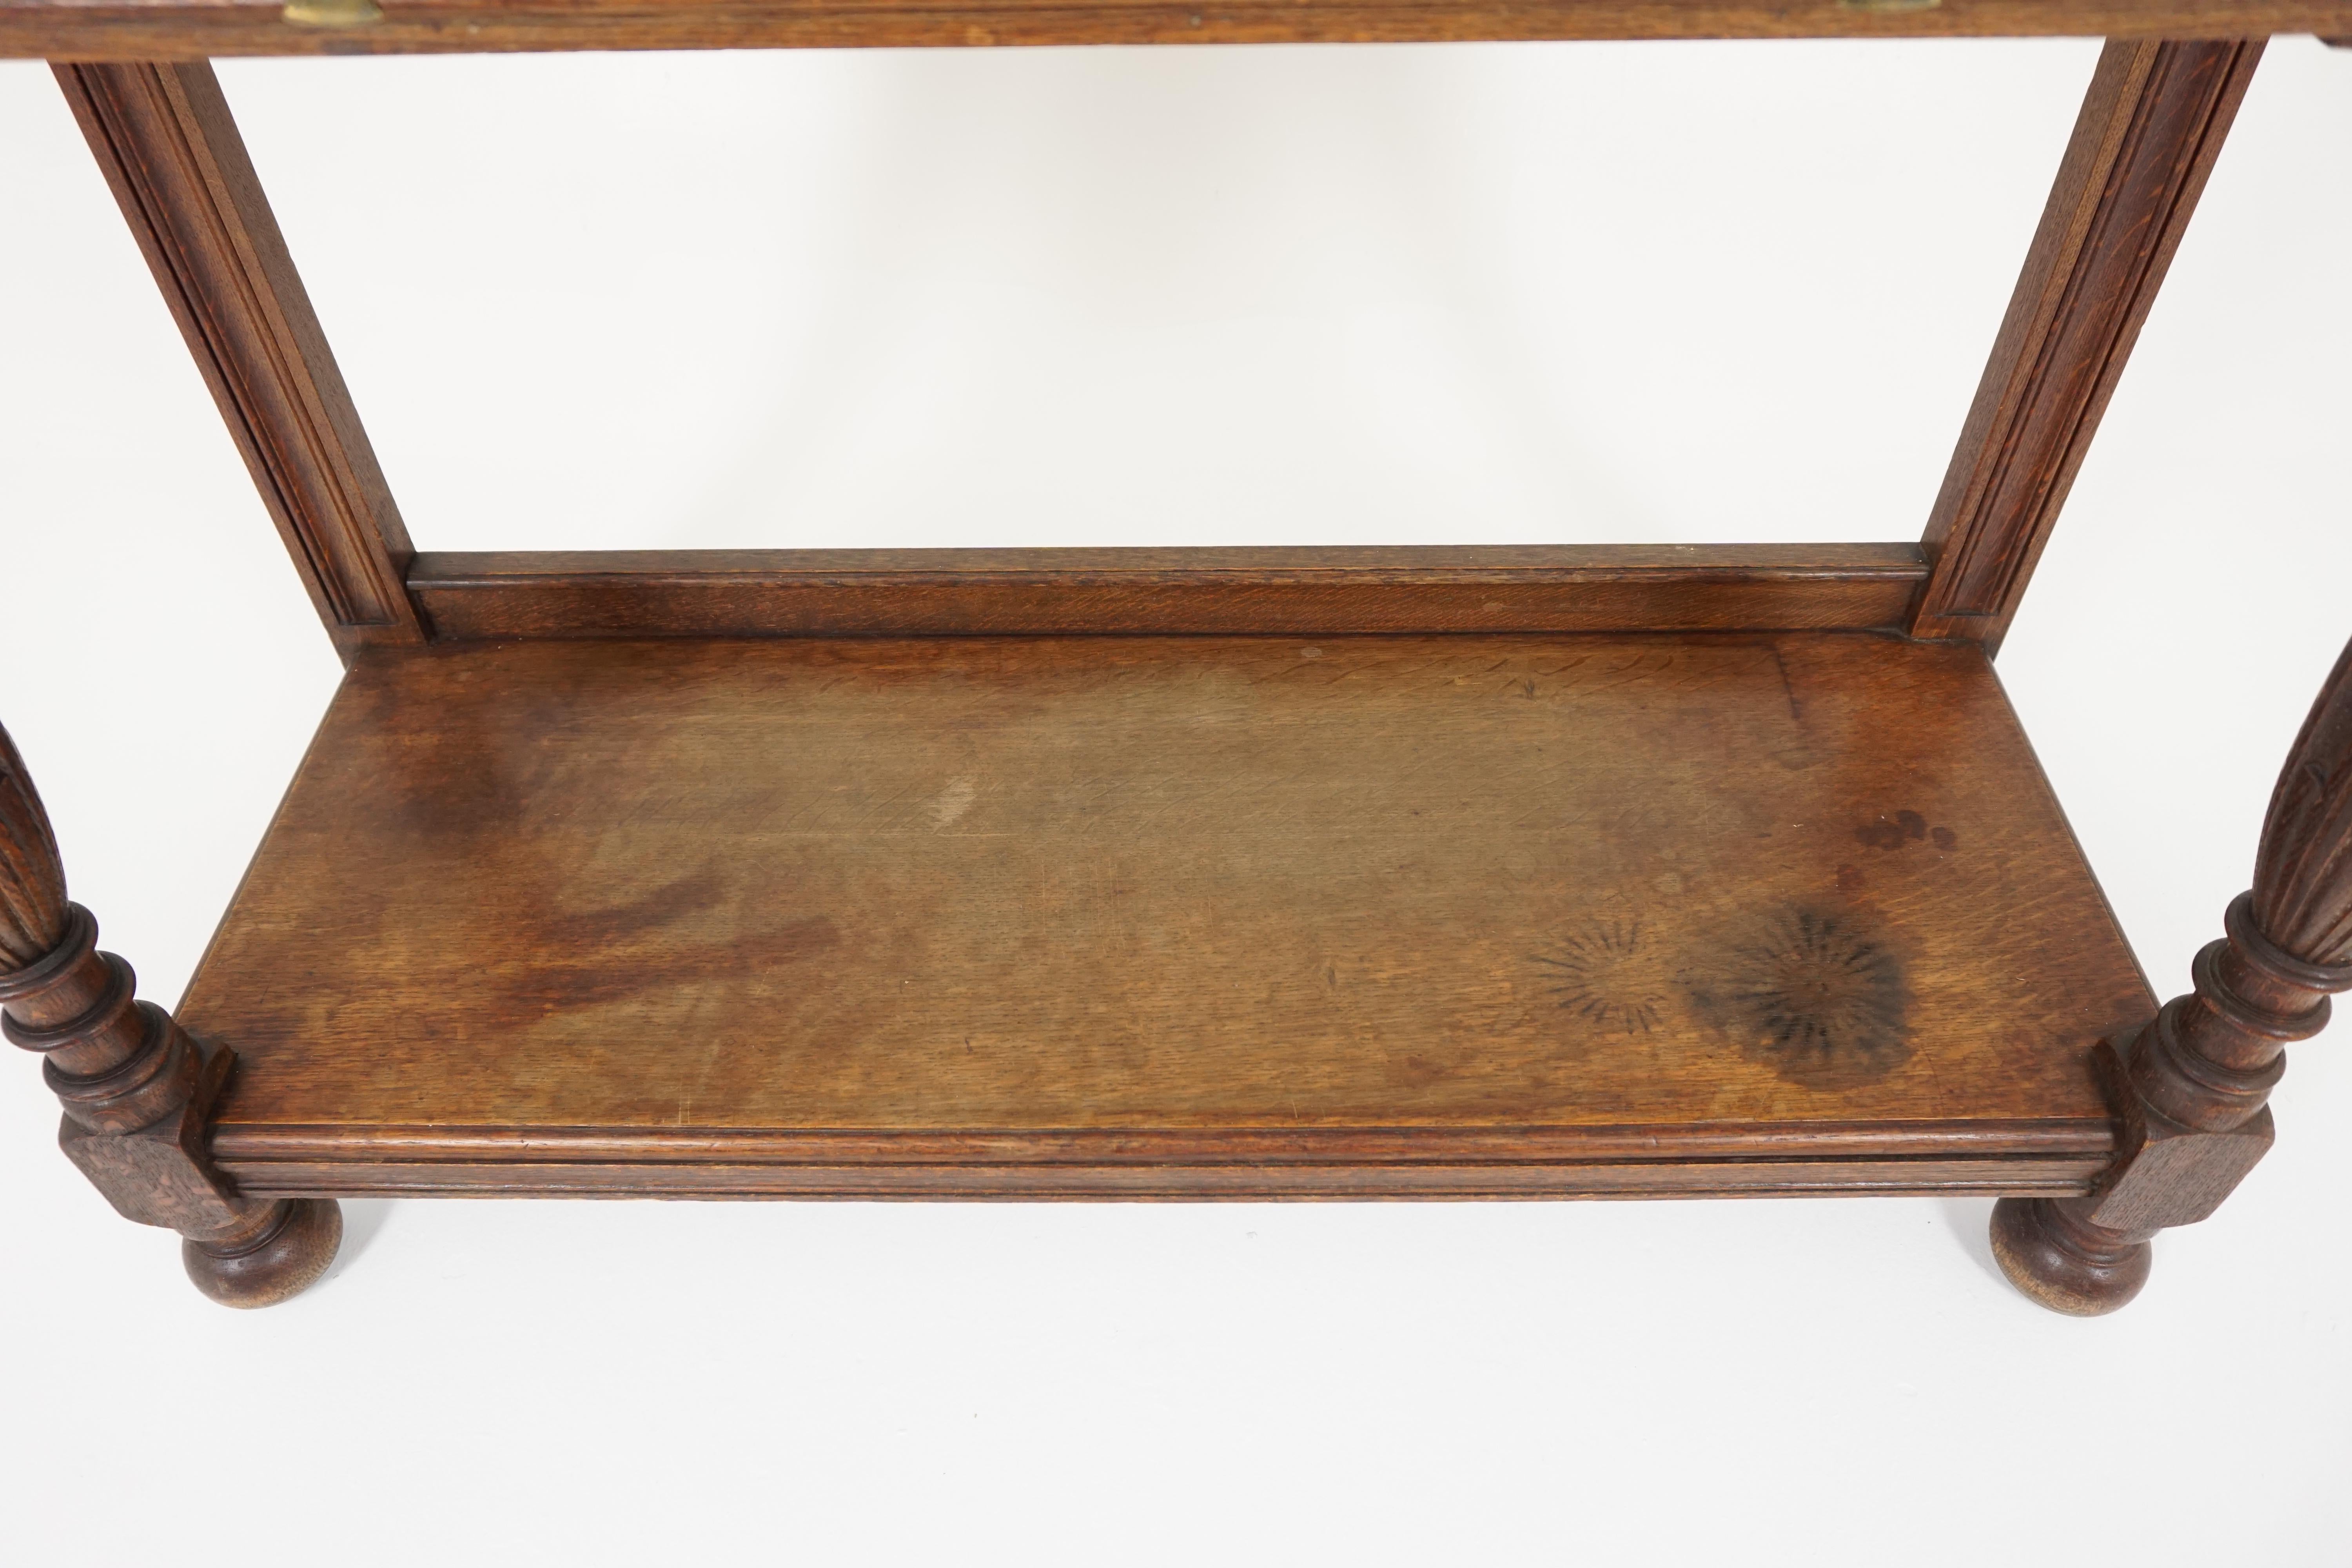 Scottish Antique Serving Table, Victorian Carved Oak Console Table, Scotland 1890, B1875